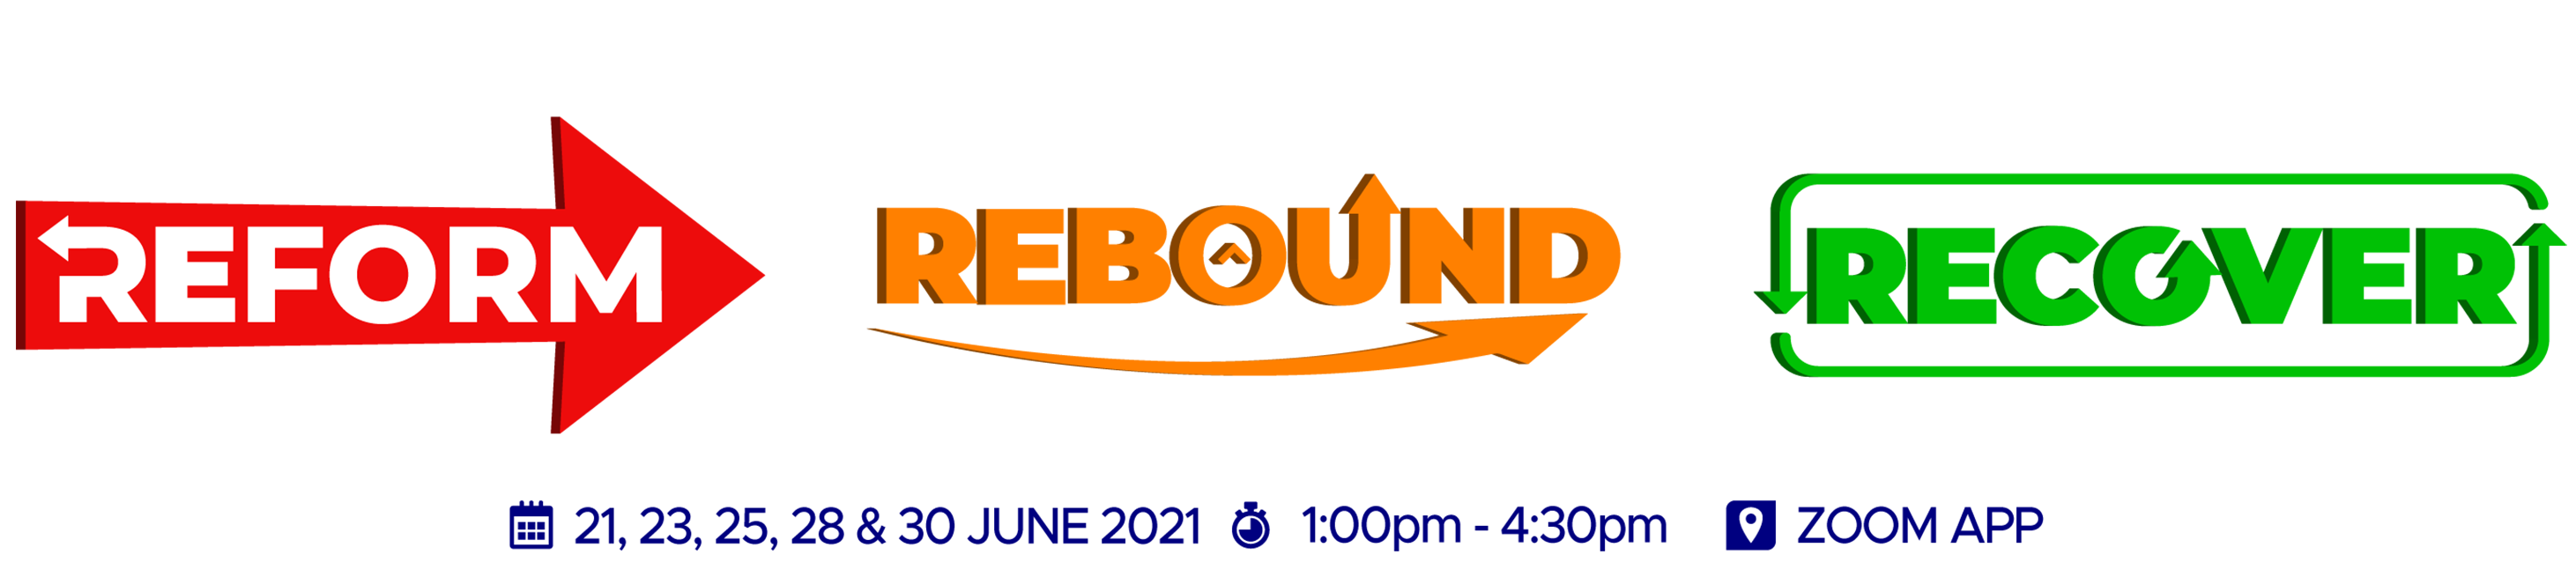 42nd National Conference of Employers: REFORM • REBOUND • RECOVER